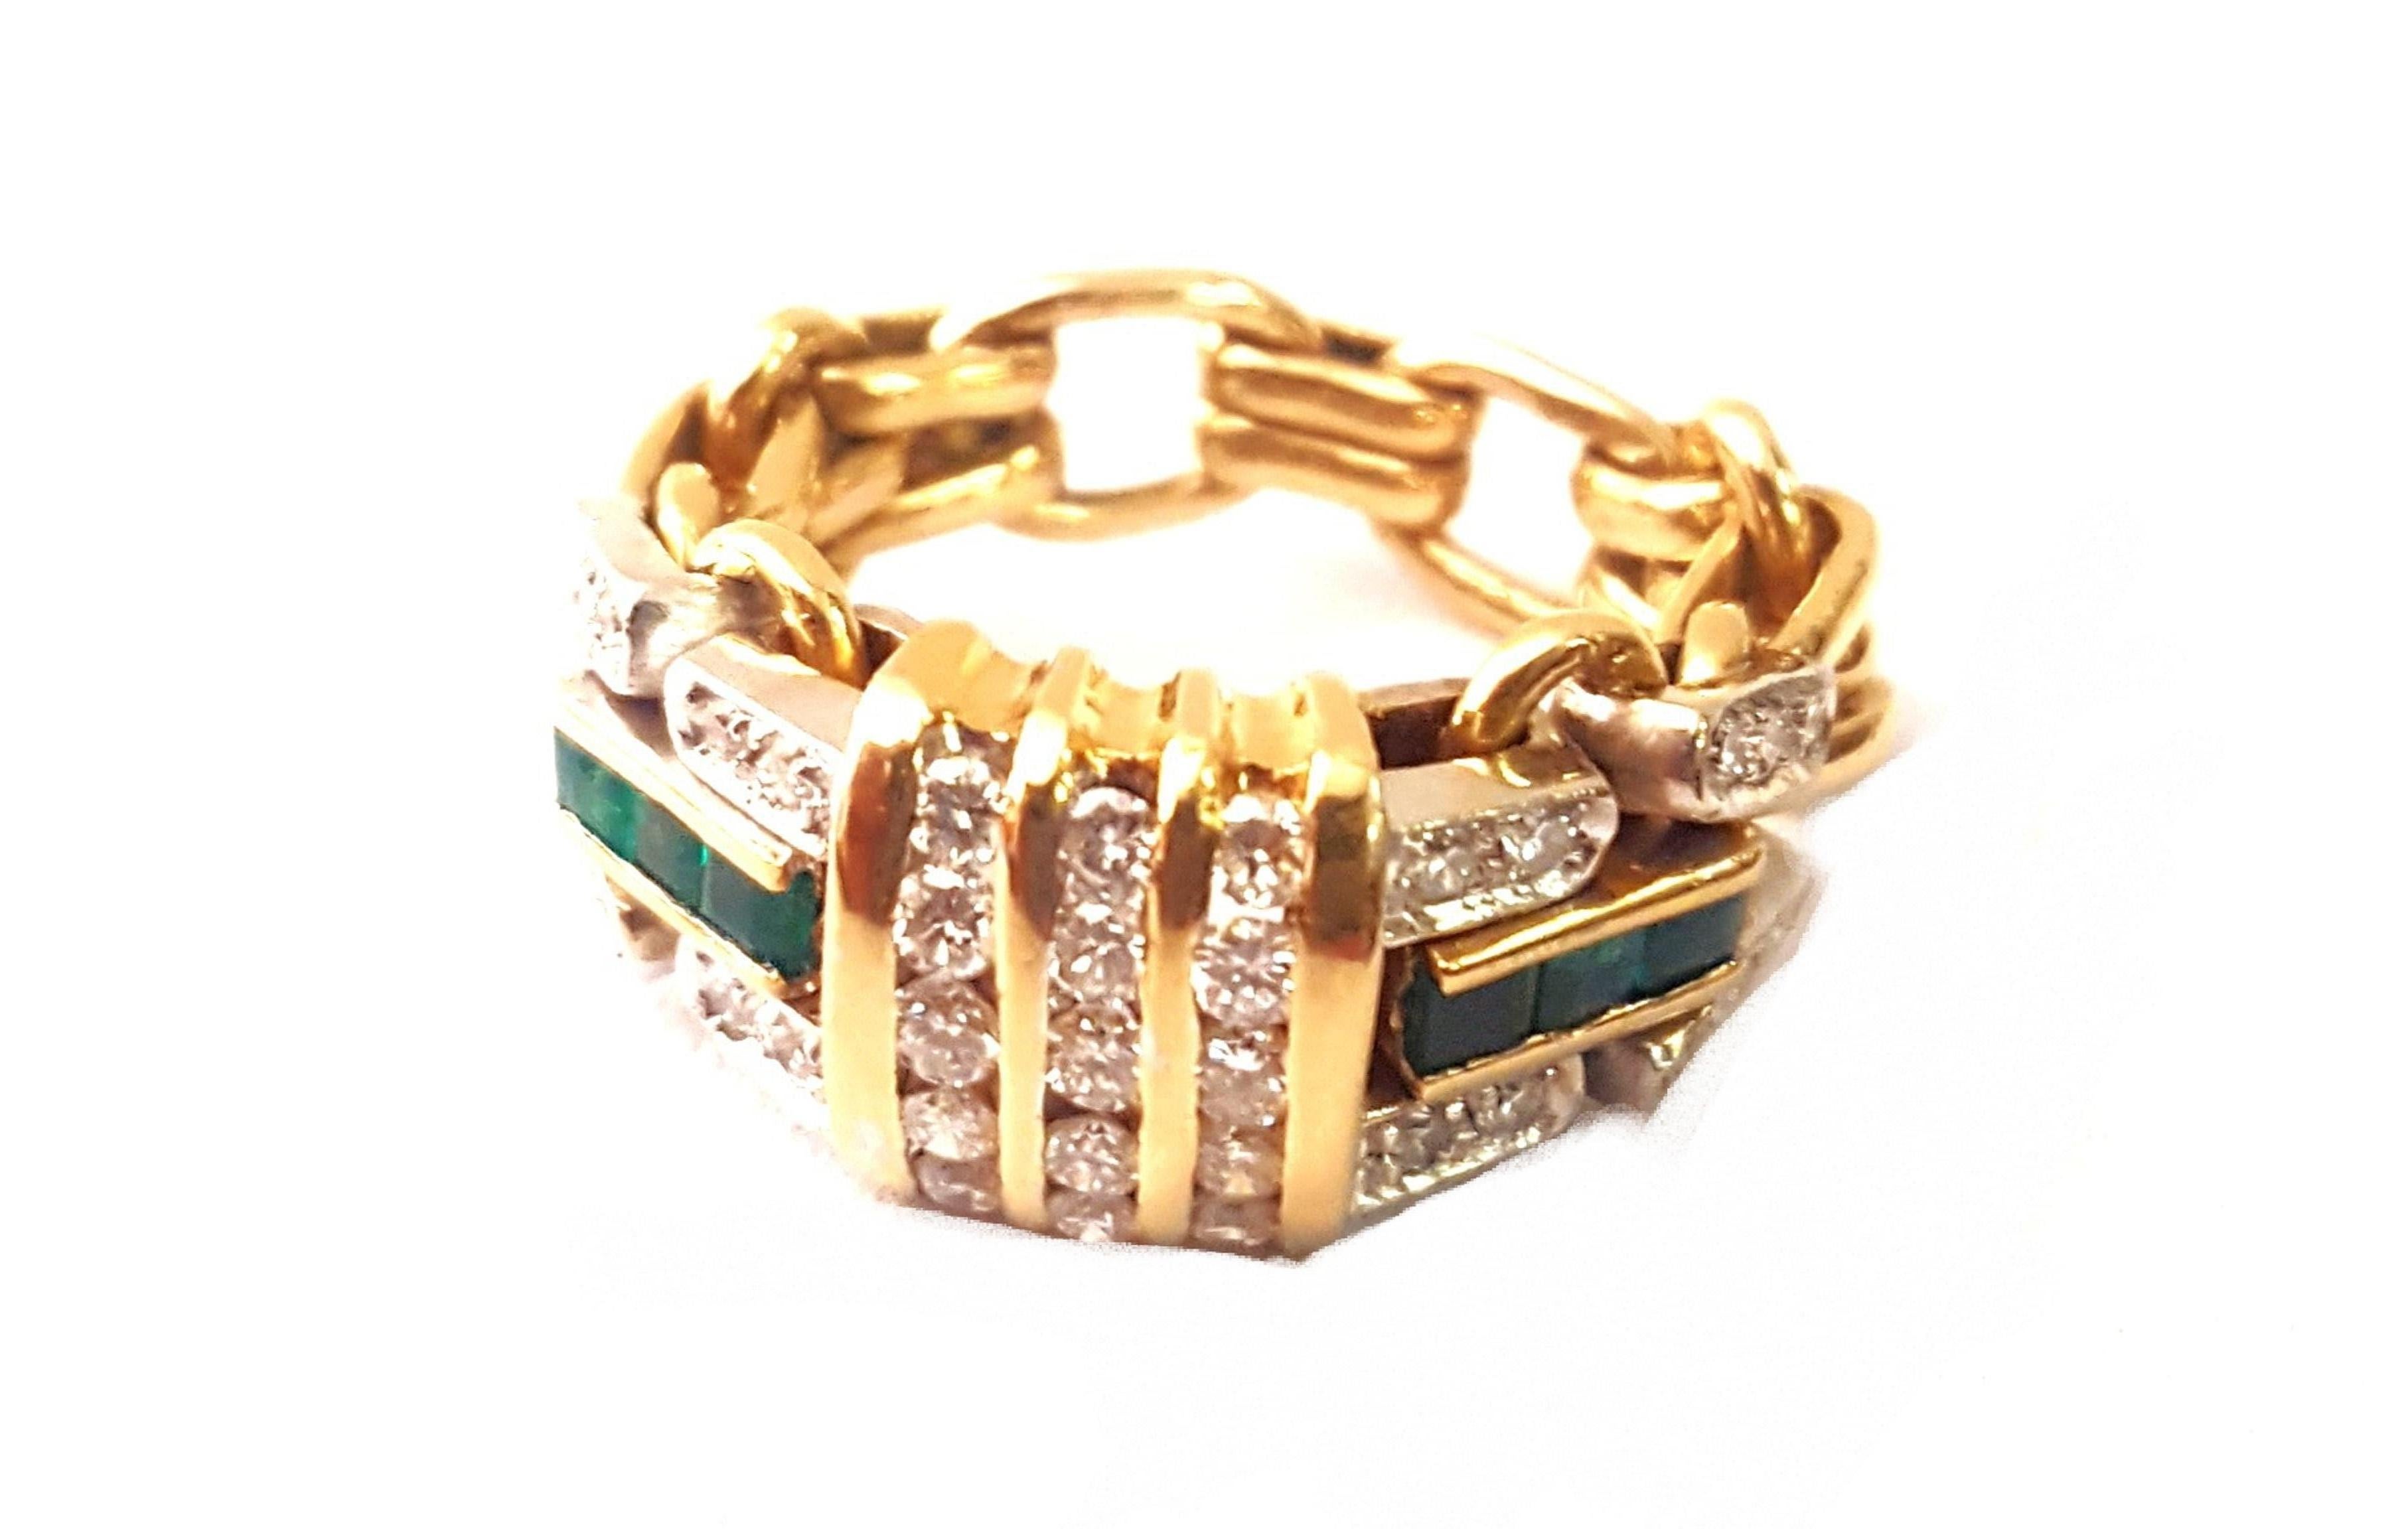 Italian craftsmanship explains itself in this spectacular 1950's creation!  Artfully crafted in 18 karat yellow gold this unusual piece features three rows of channel set white diamonds as the focal point.  On each side find four rows of prong set